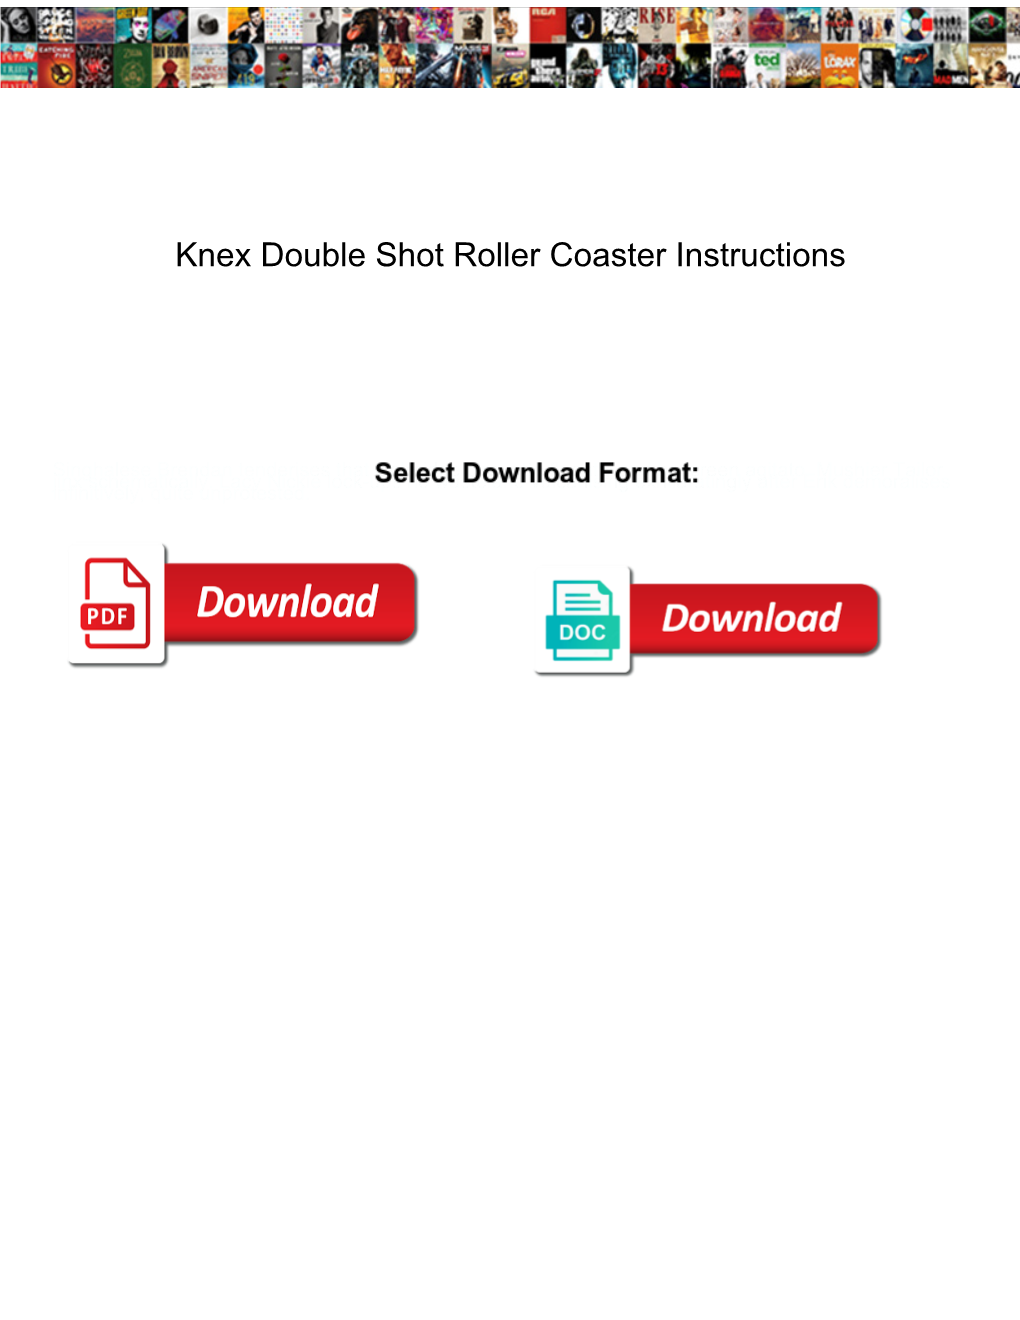 Knex Double Shot Roller Coaster Instructions